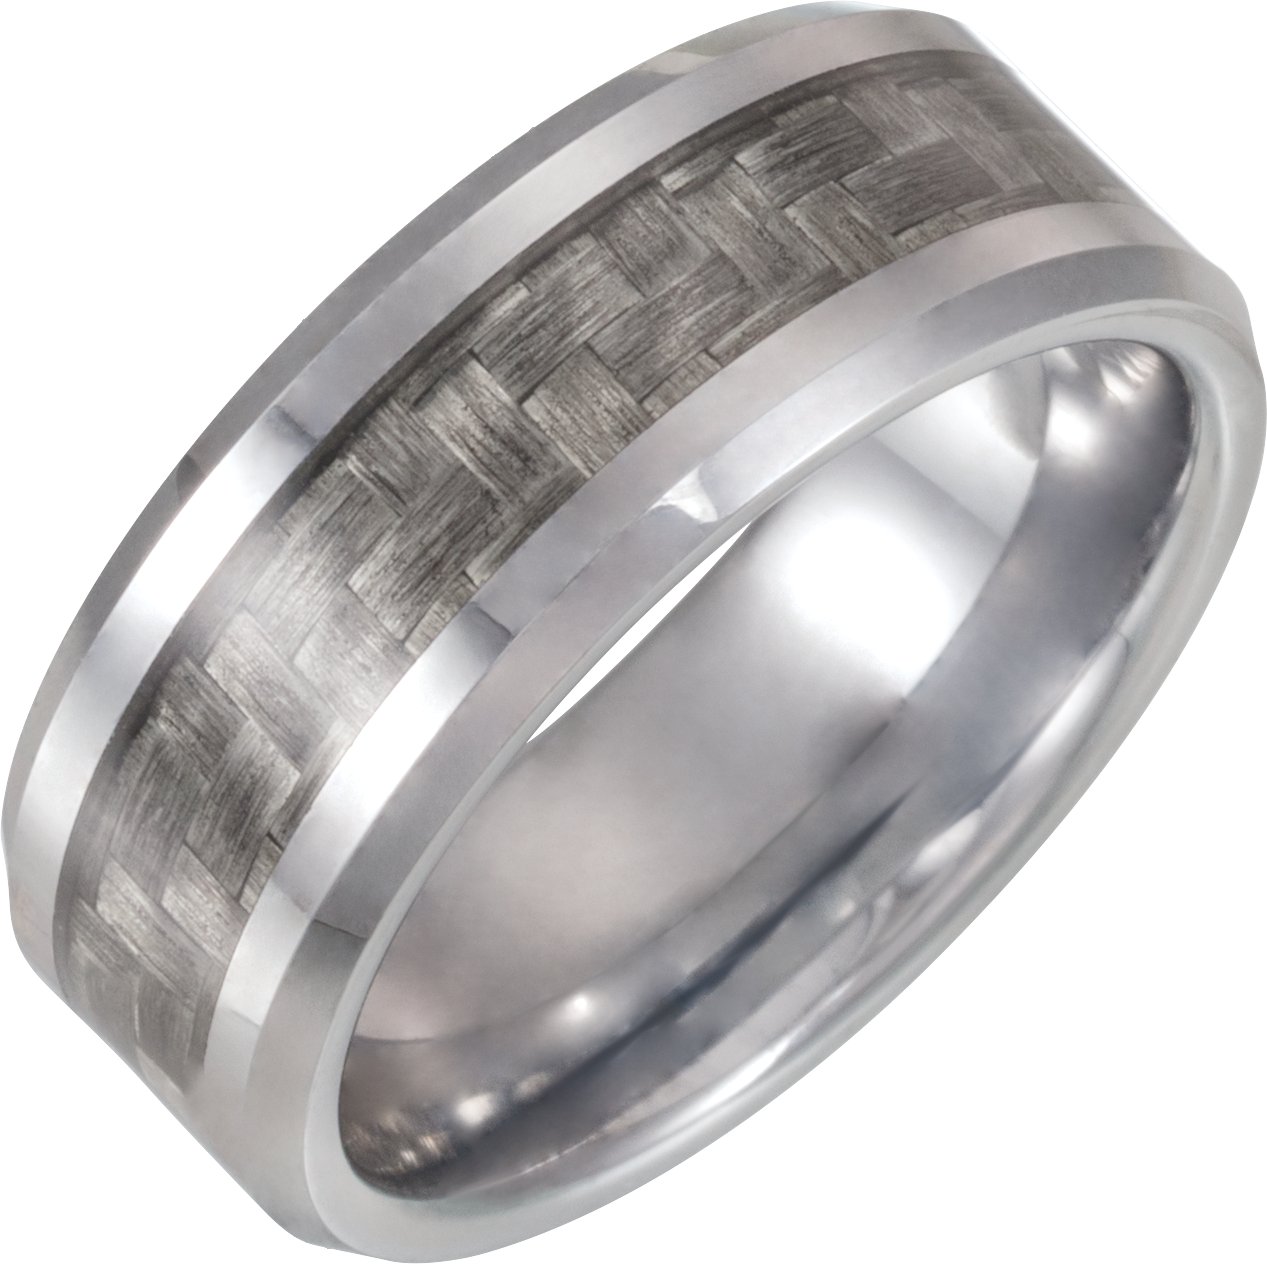 Tungsten 8 mm Band with Carbon Fiber Inlay Size 9